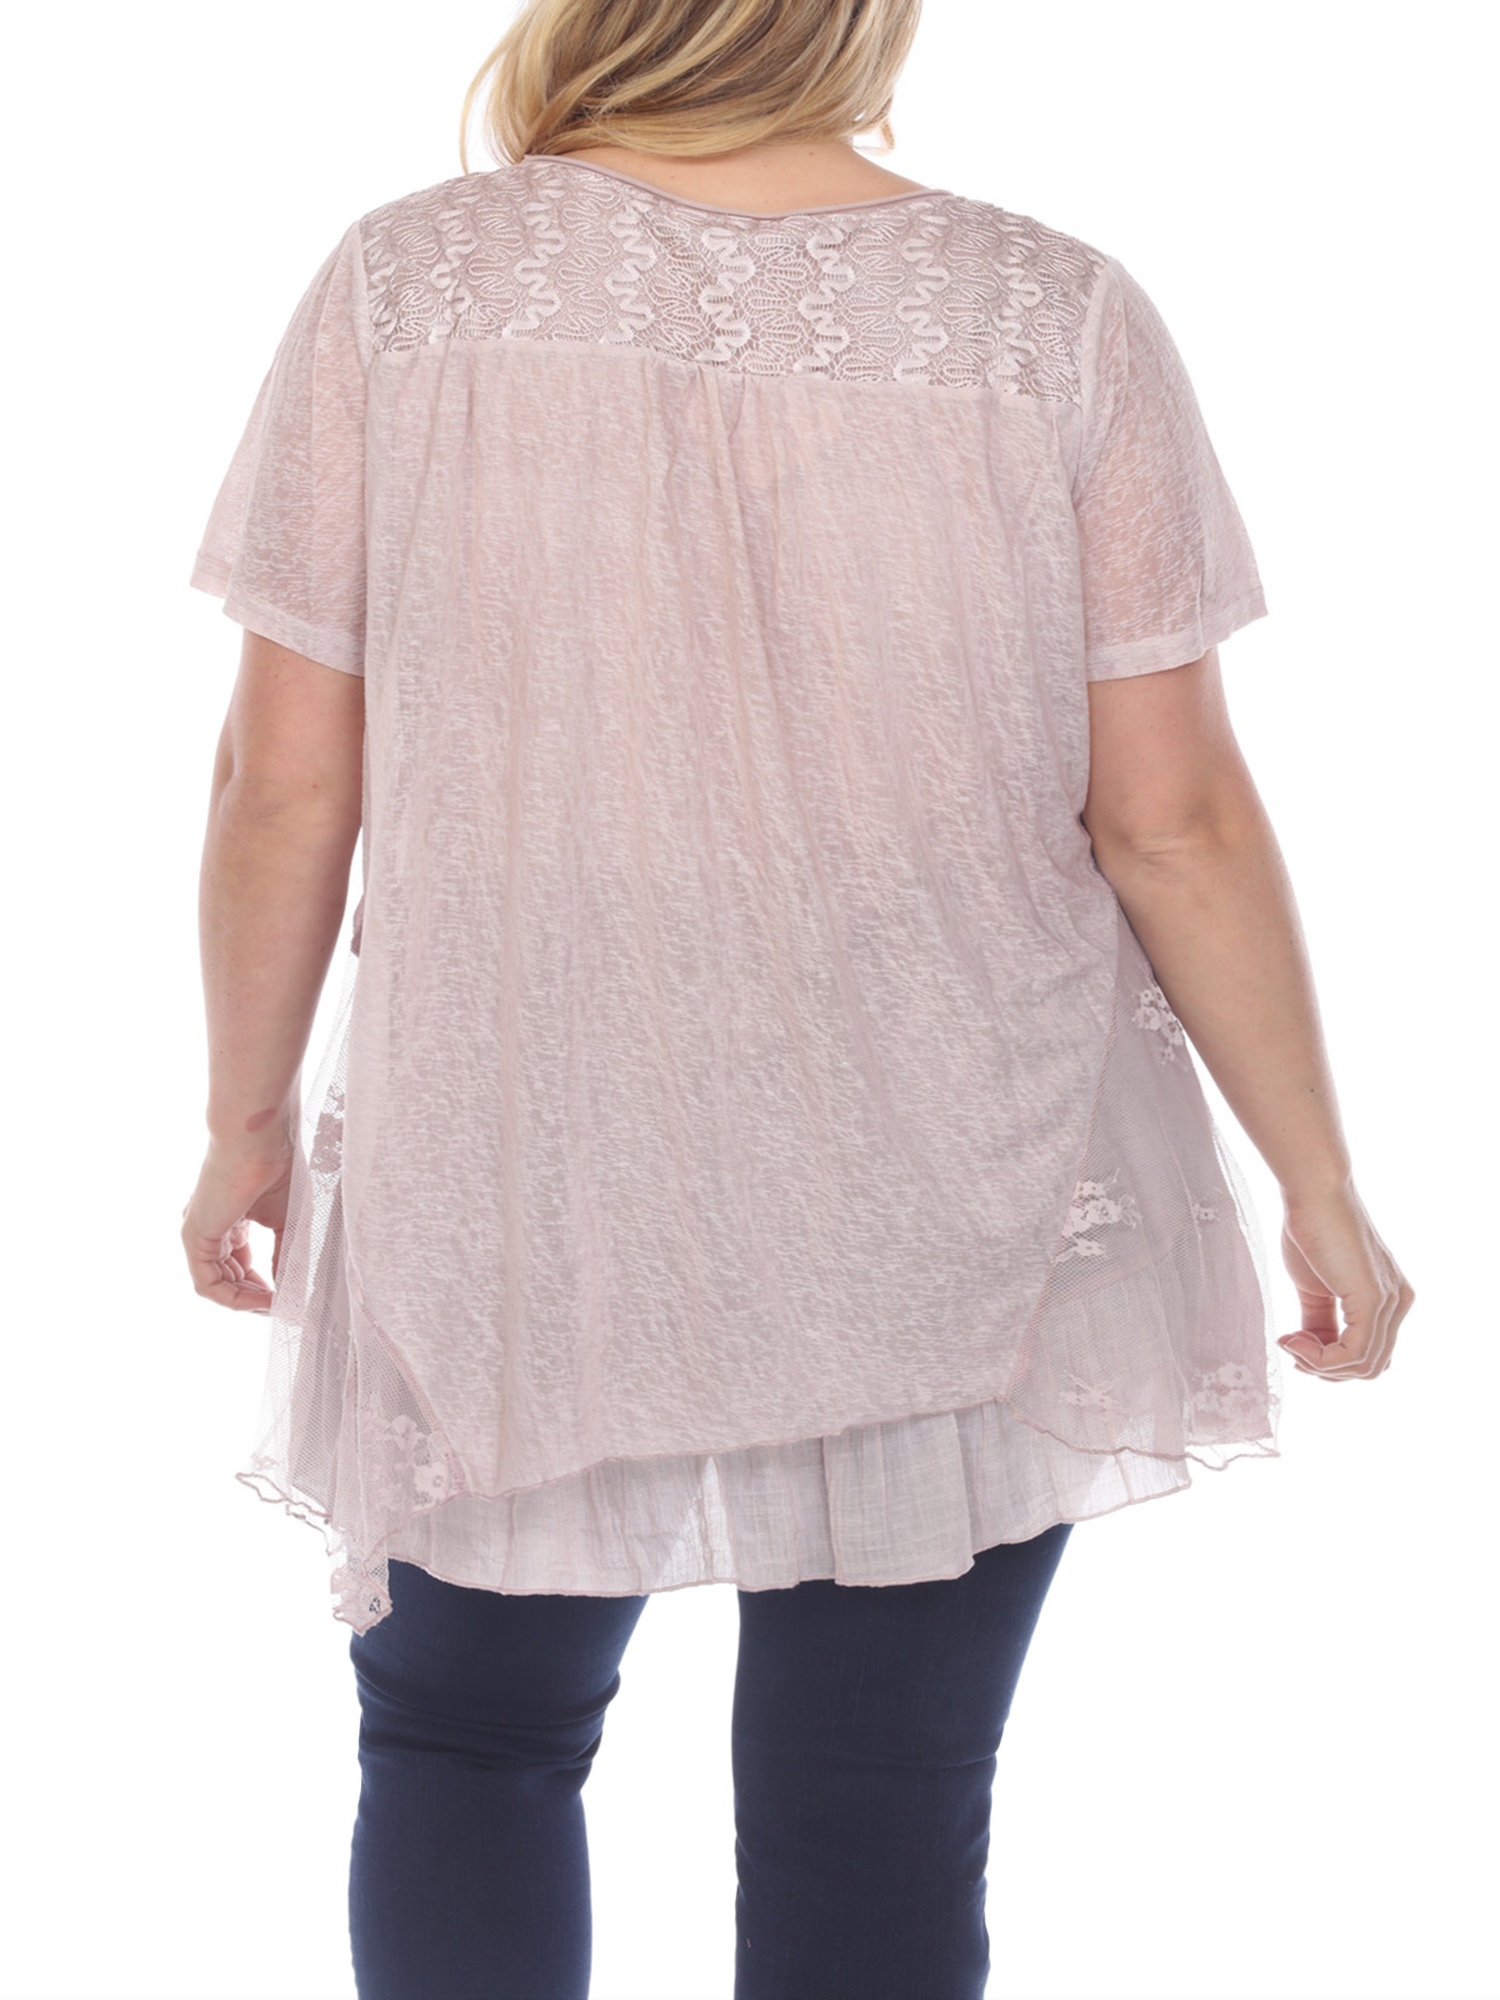 Simply Couture Women's Plus Size Short Sleeve Lace Mixed Media Layer Top